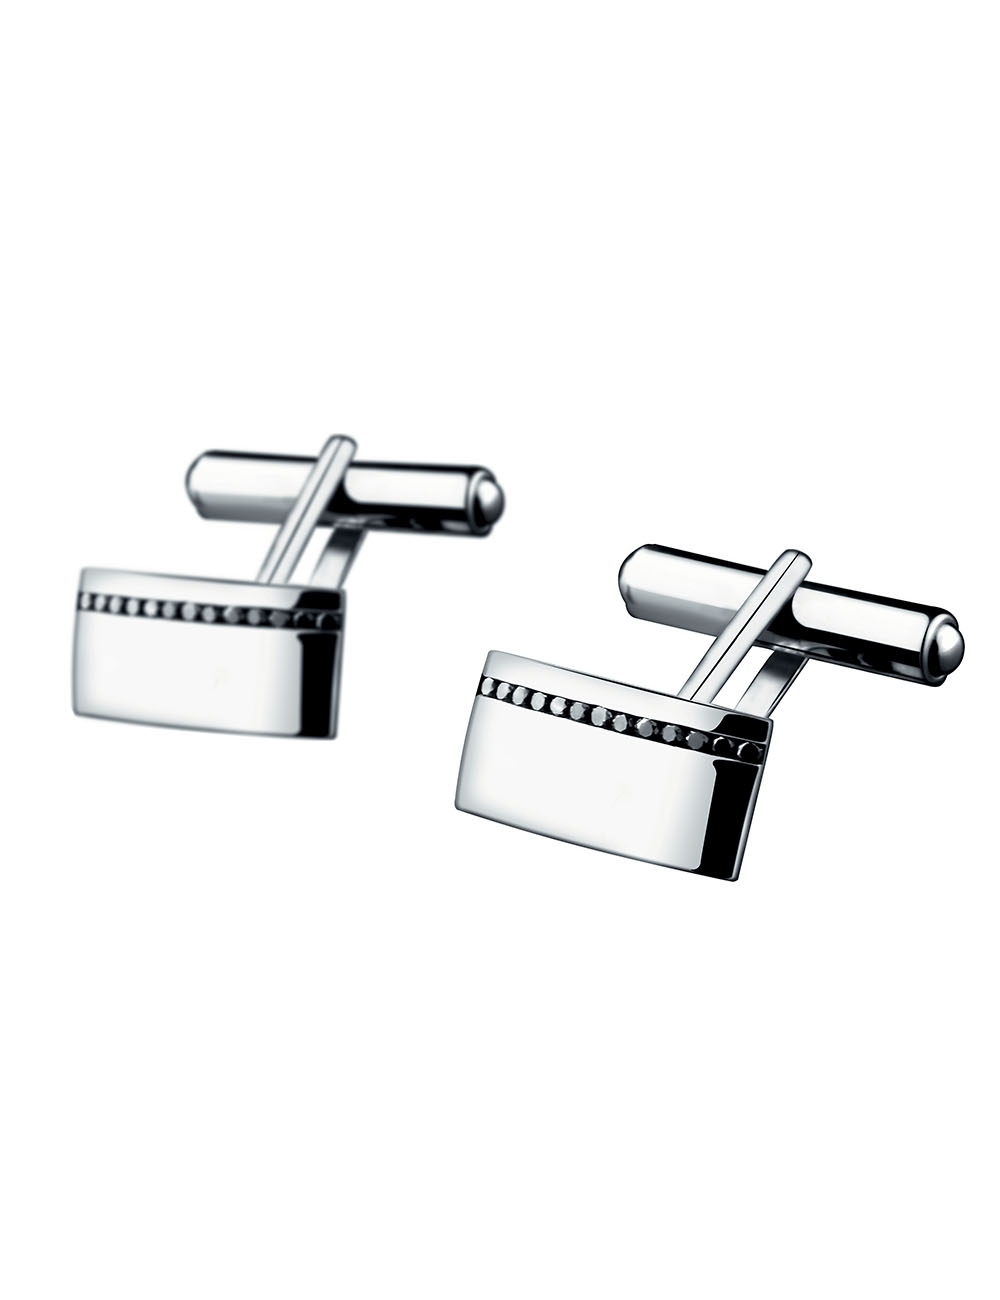 Cufflinks for men in gold 18k and black diamonds to wear every day for a refined look